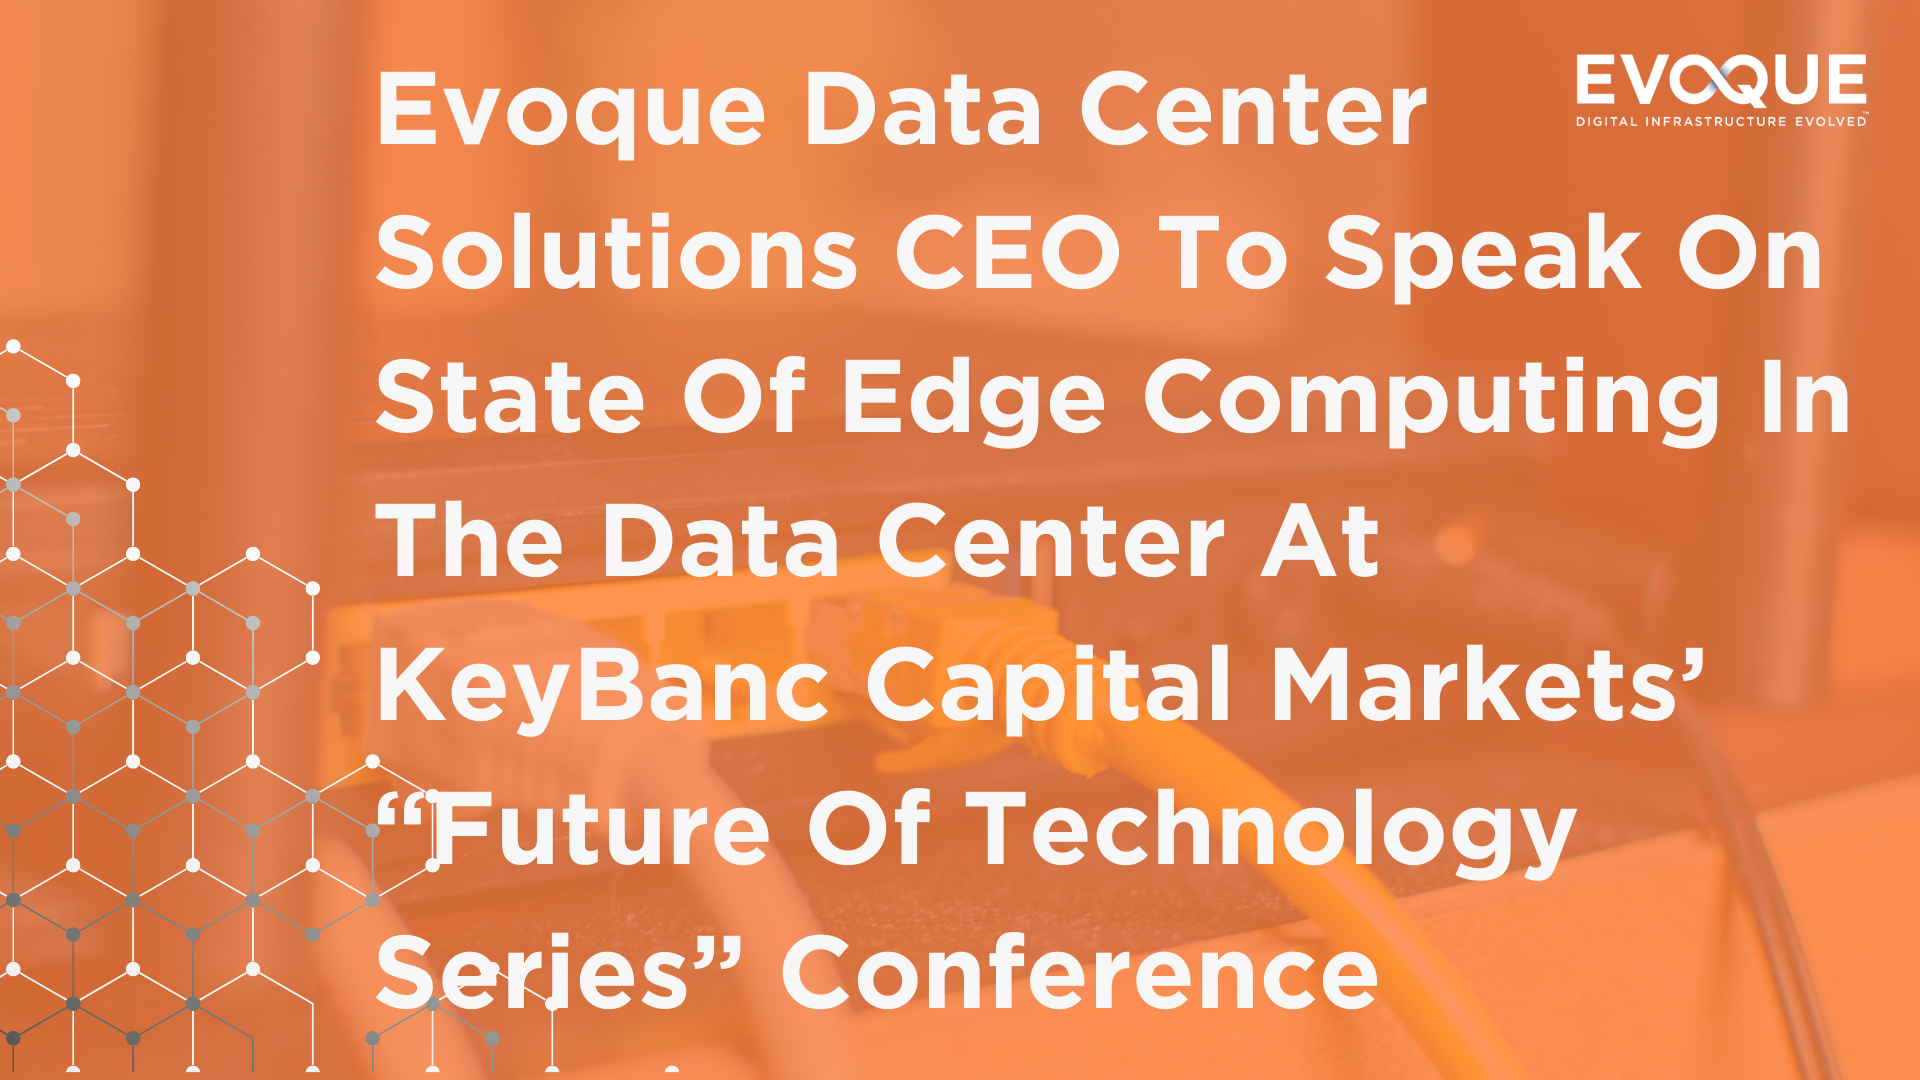 Evoque Data Center Solutions CEO To Speak On State Of Edge Computing In The Data Center At KeyBanc Capital Markets’ “Future Of Technology Series” Conference